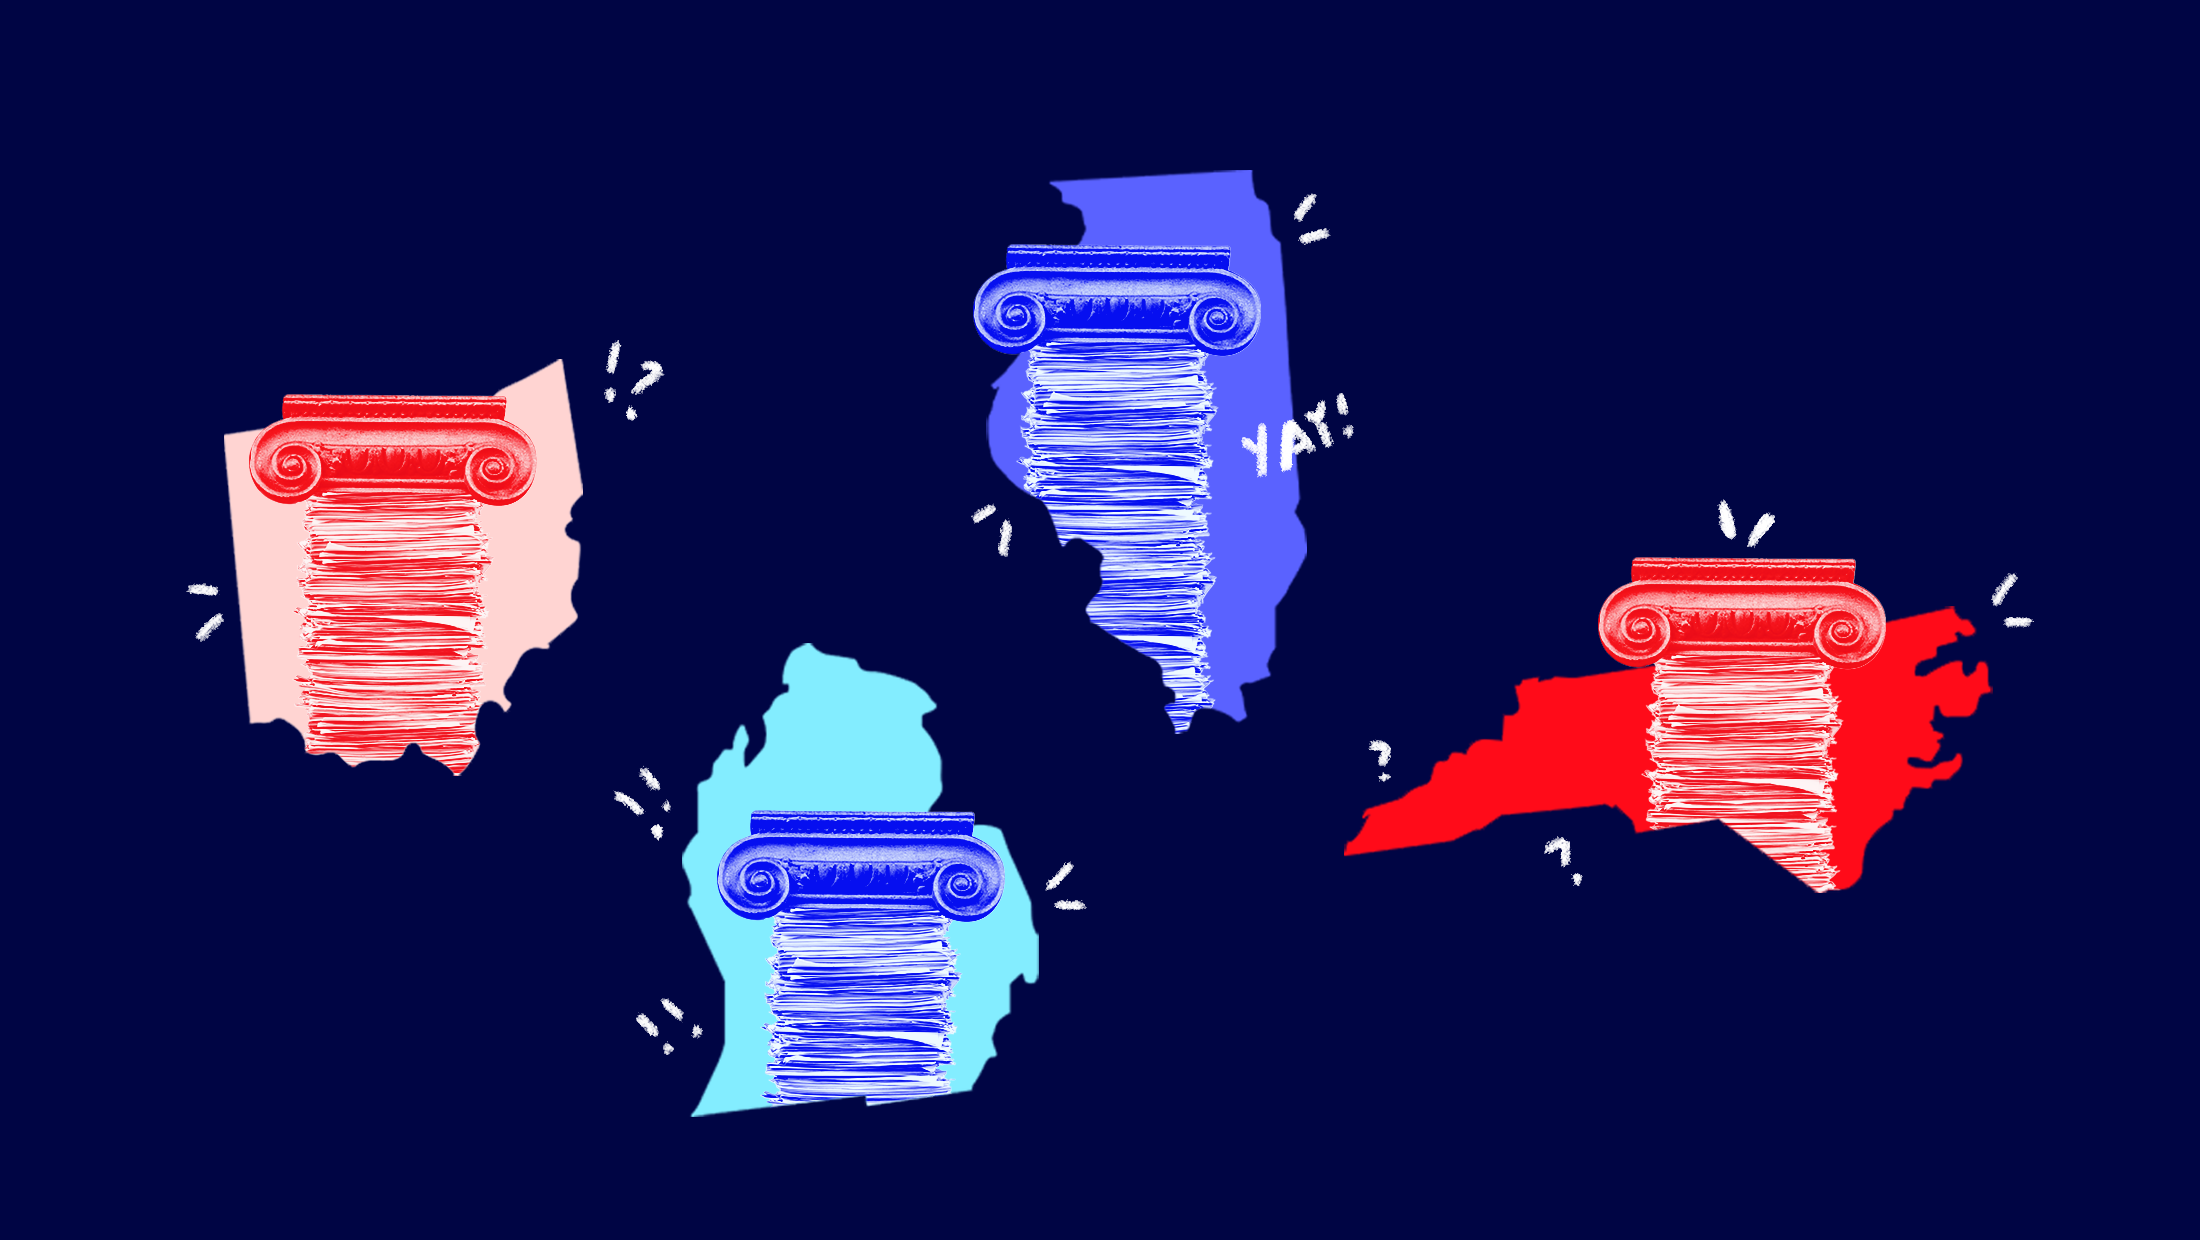 The outlines of Illinois, Michigan, North Carolina and Ohio on a dark blue outline, with columns of court documents in each outline and Illinois and Michigan tinted shades of blue and North Carolina and Ohio tinted shades of red.